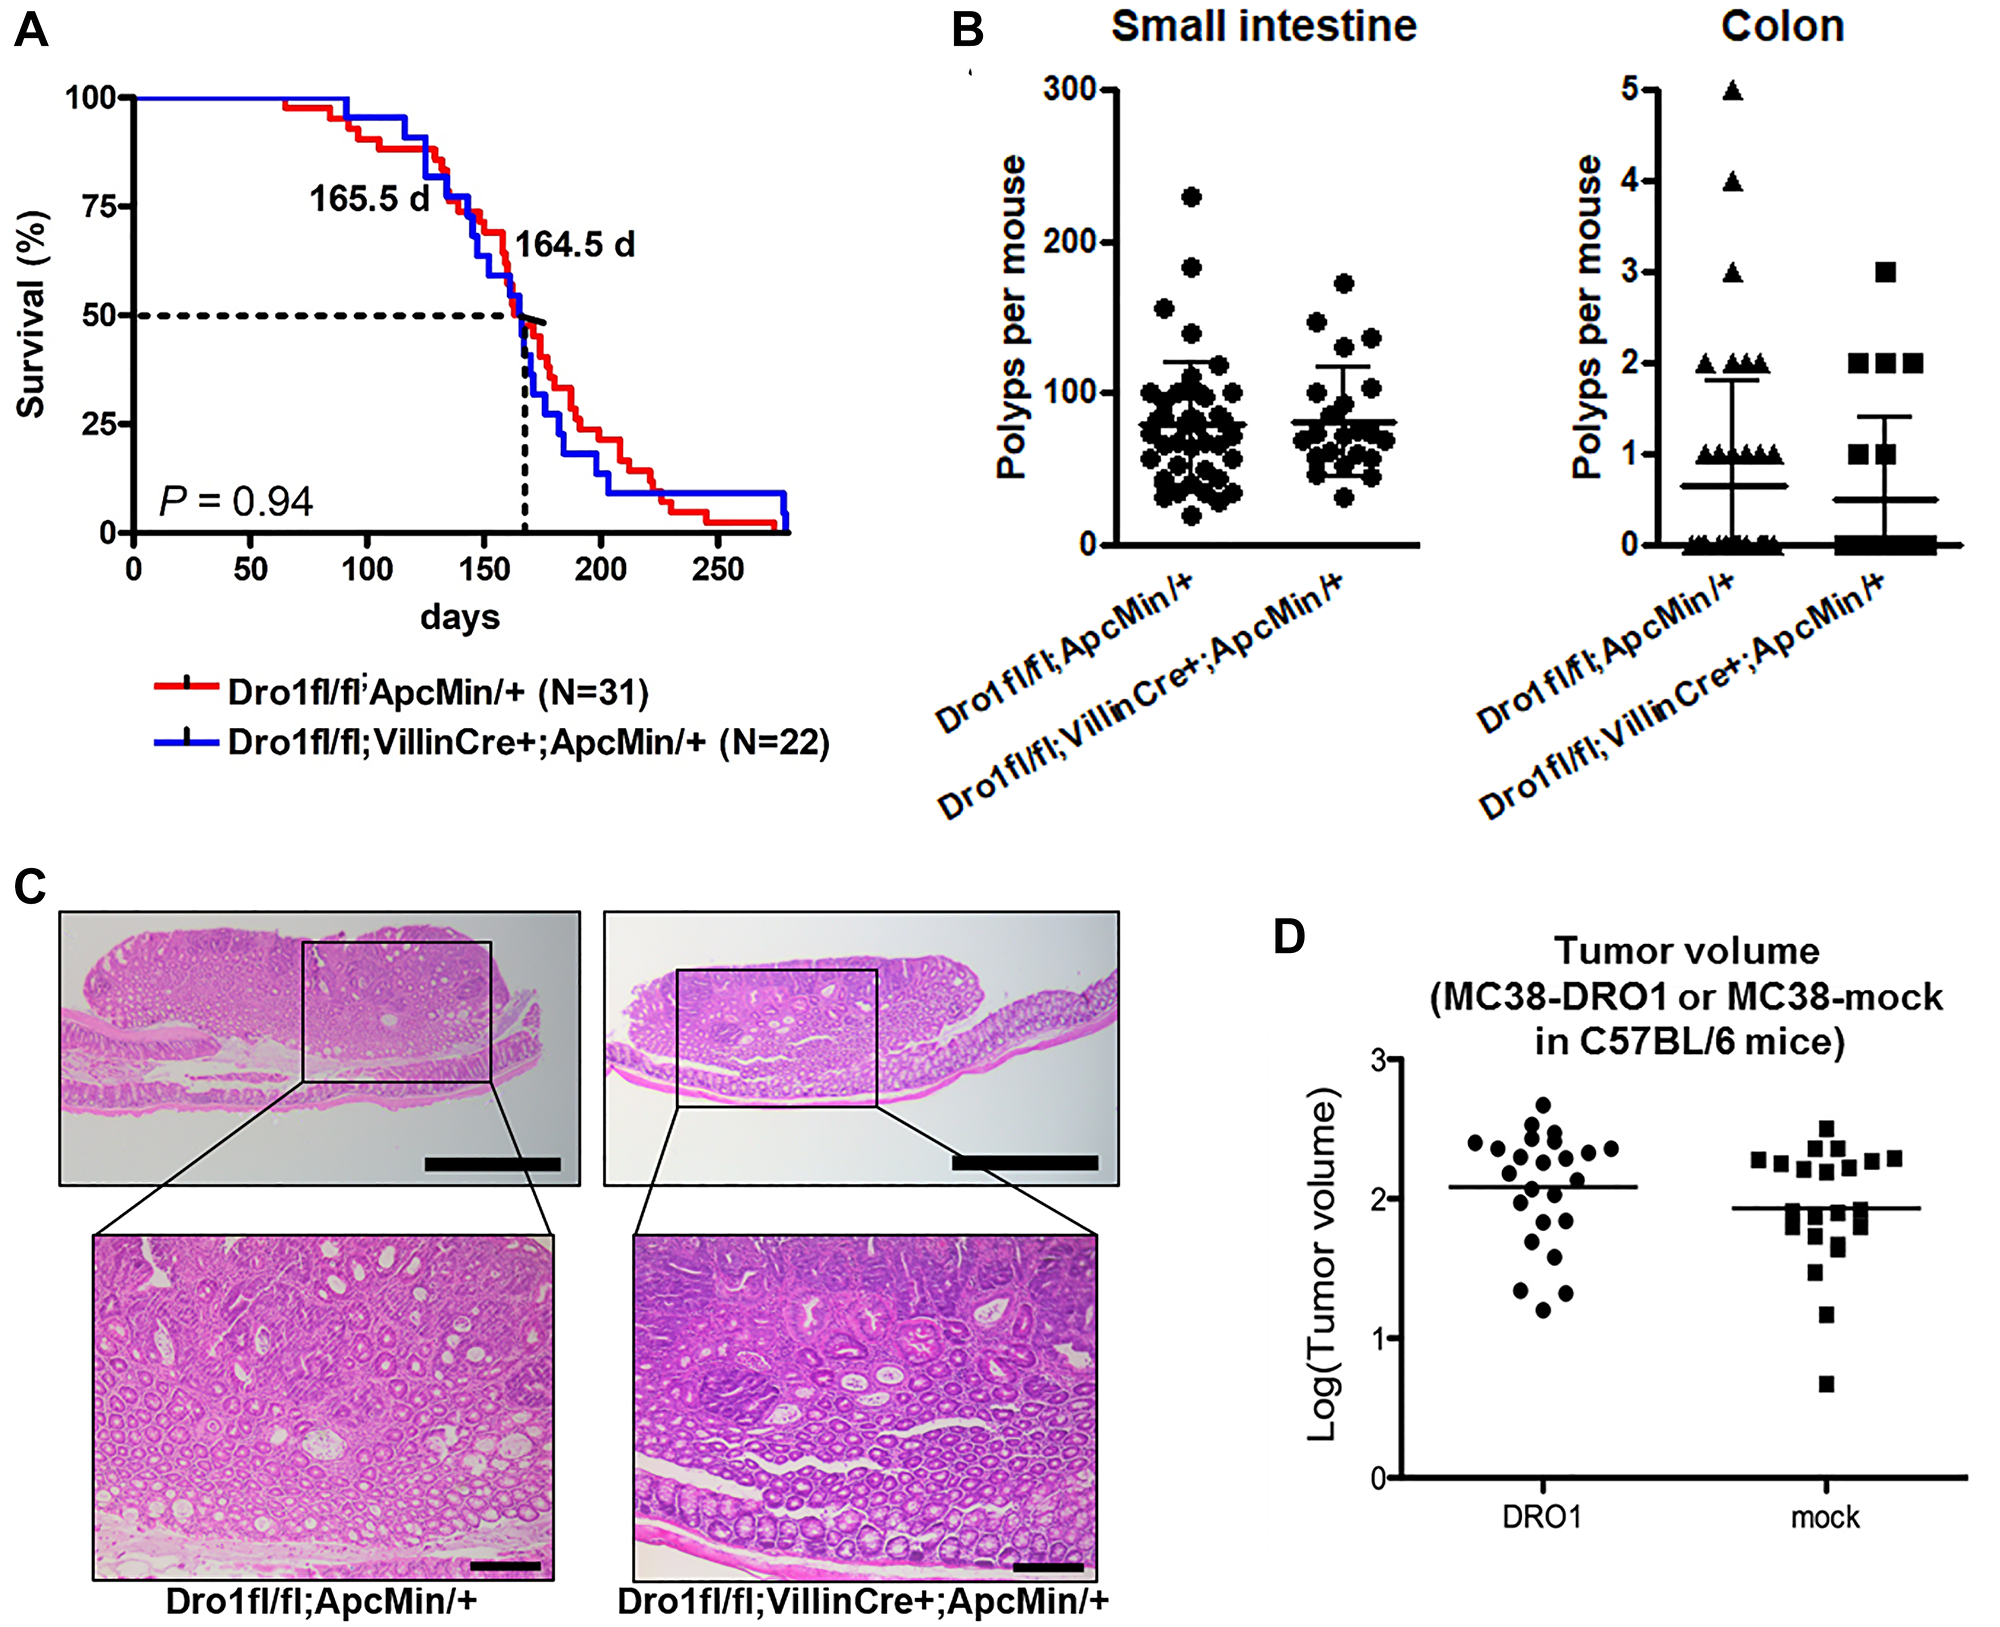 Colon tumor development is unaffected by epithelial Dro1/Ccdc80.